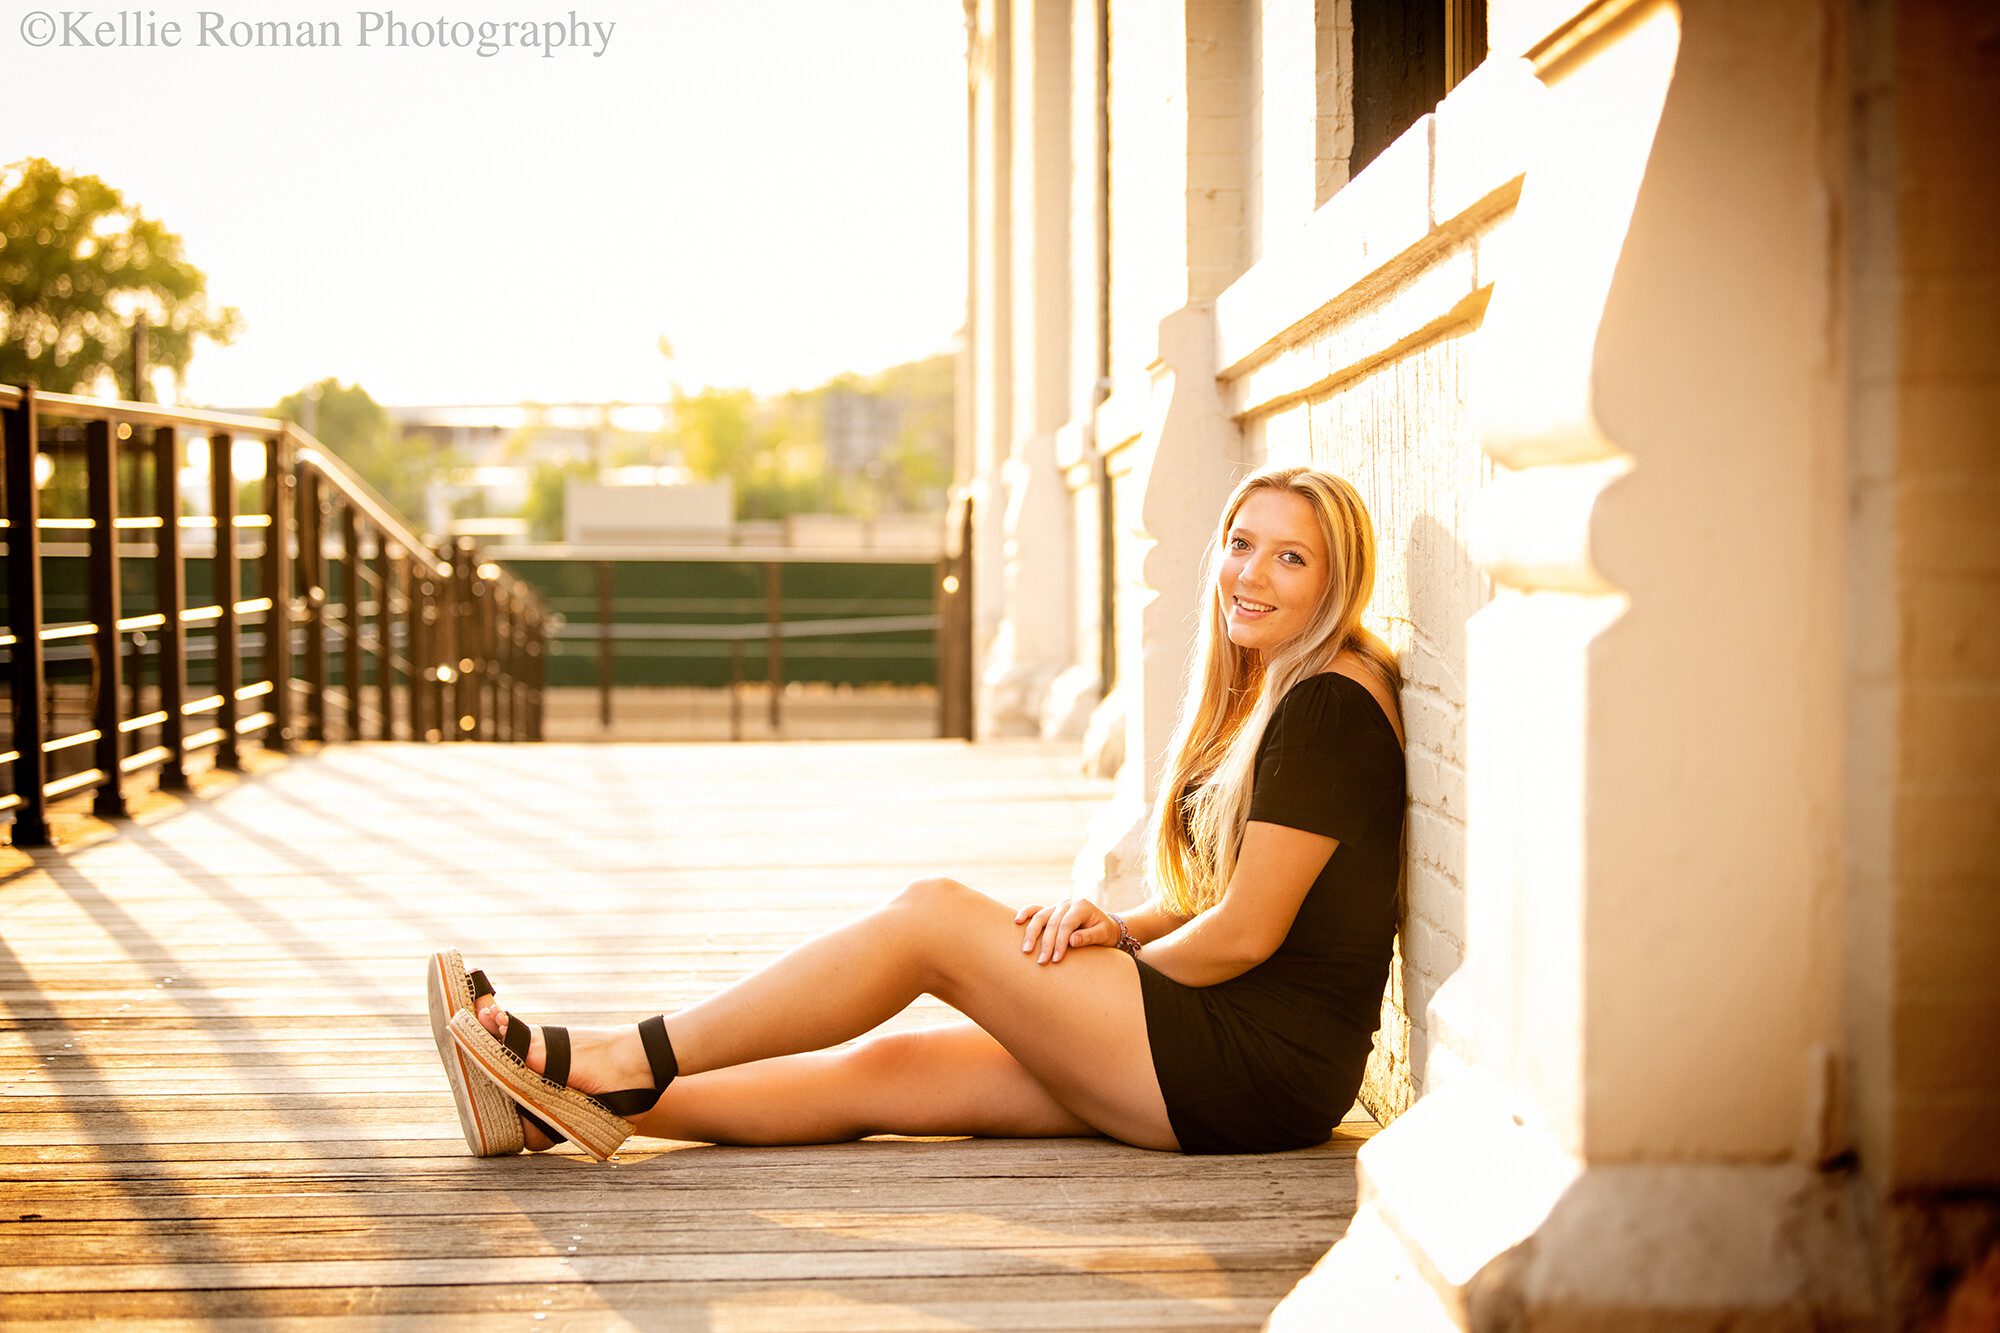 senior photos milwaukee. high school senior girl is sitting in downtown milwaukee with her back against a cream colored building. the ground is a wood boardwalk and the glowing golden summer sun is coming behind her. she has her legs out with hands resting in her lap. she's wearing a black dress and sandals.